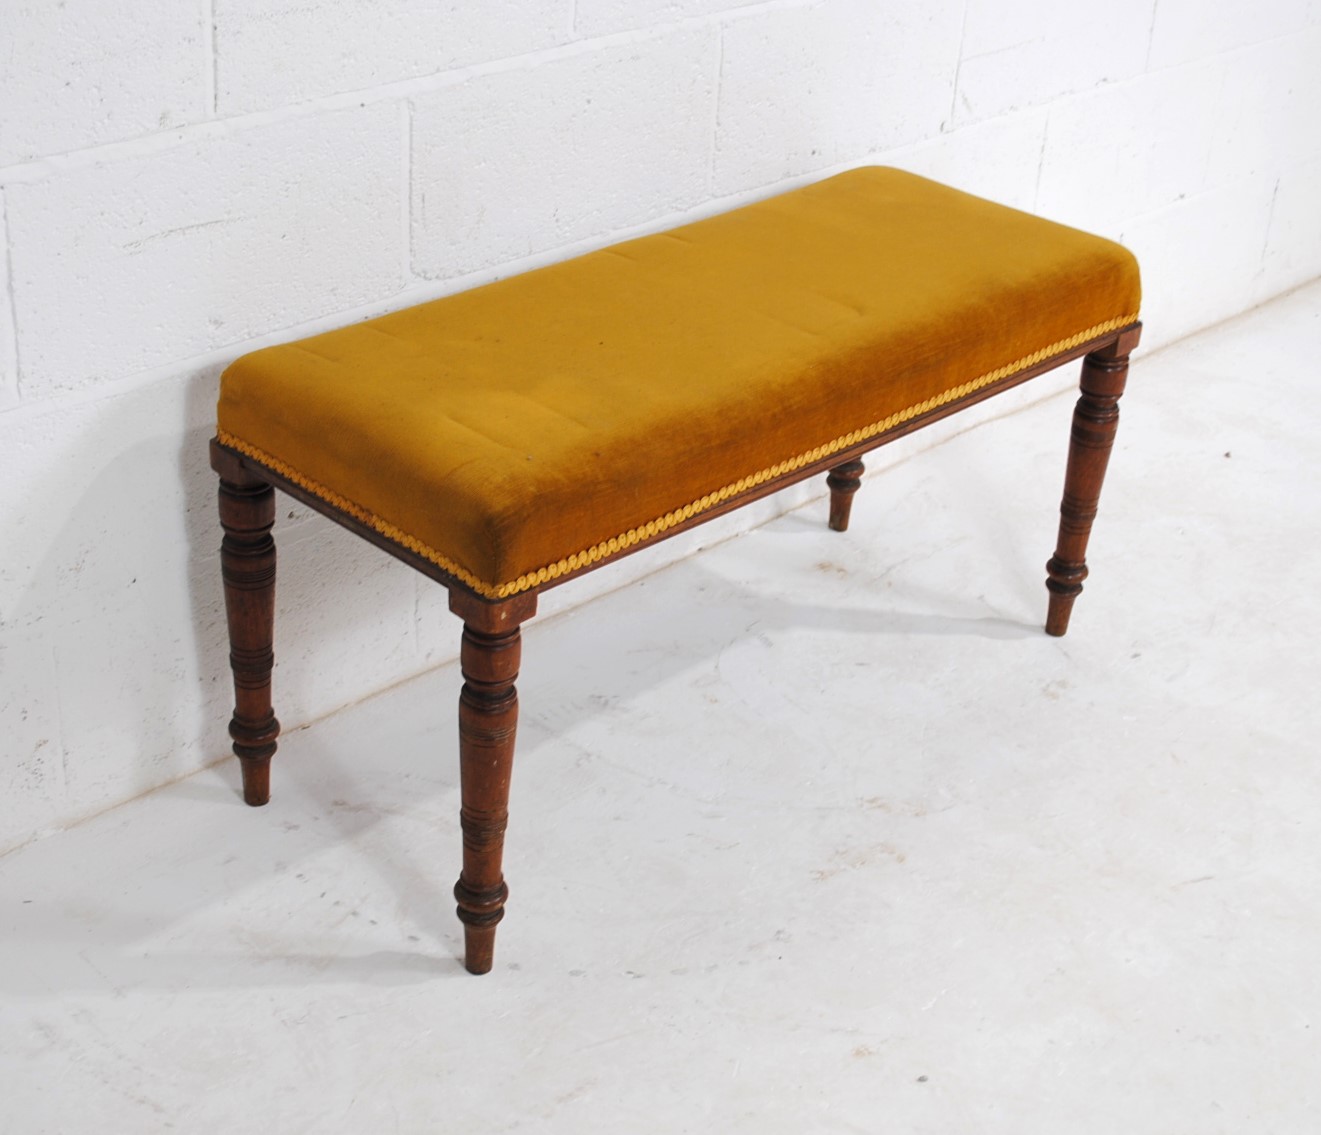 A Victorian upholstered duet stool, raised on turned mahogany legs - length 99cm, height 51cm - Image 3 of 5